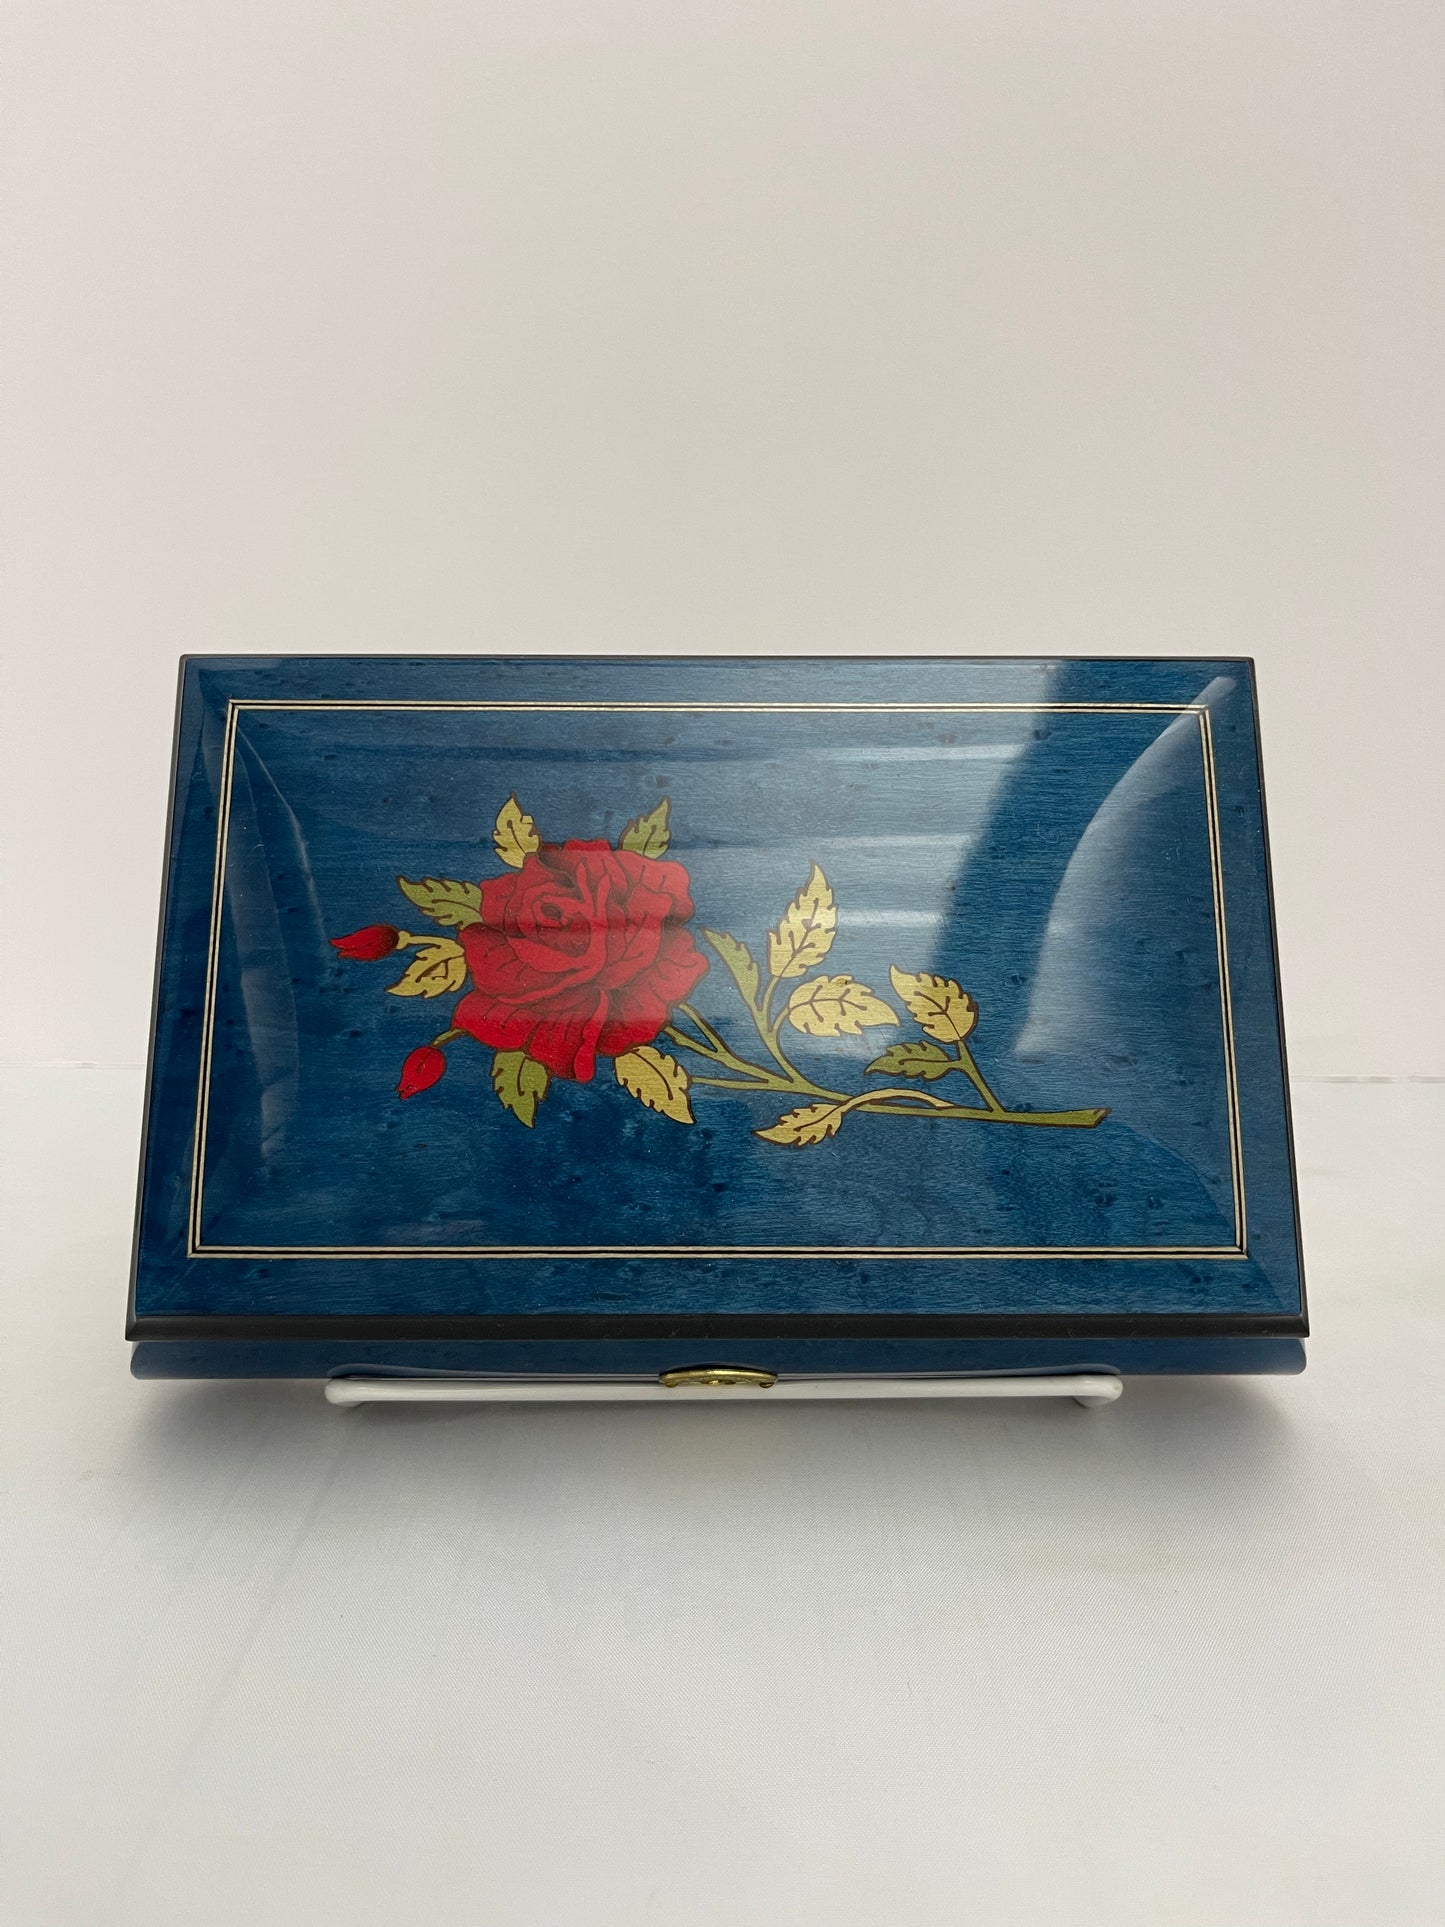 Inlaid Sorrento Italy Music Box Collectible Reuge "Feelings" Tune